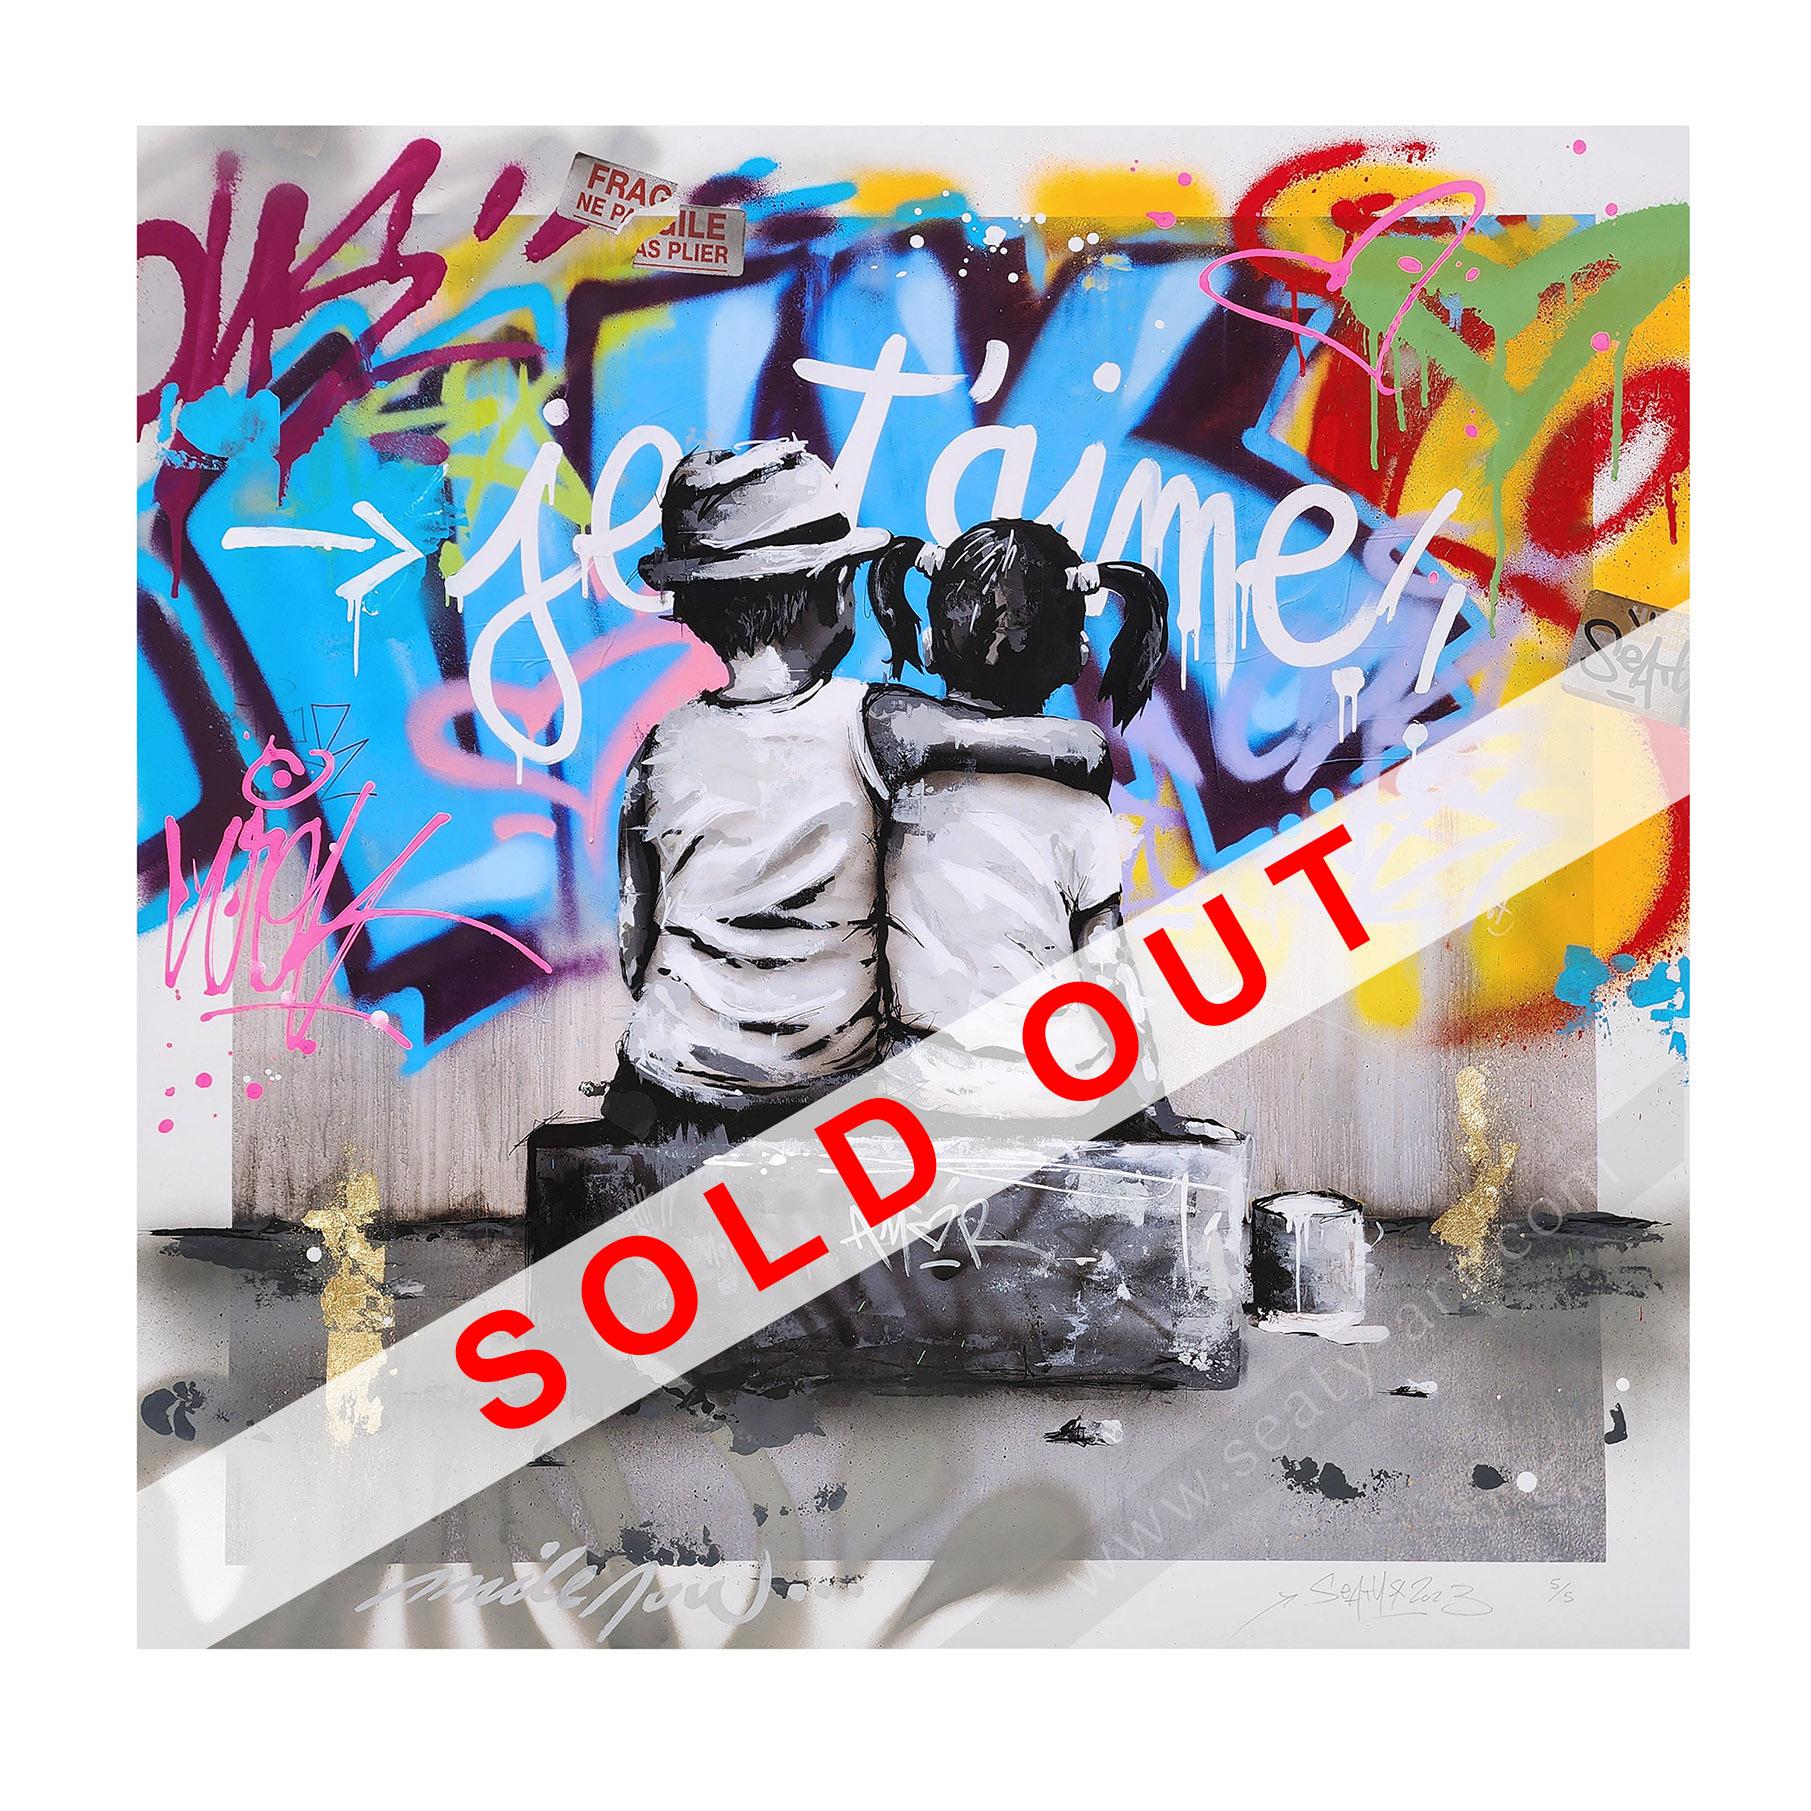 Sold out site 22